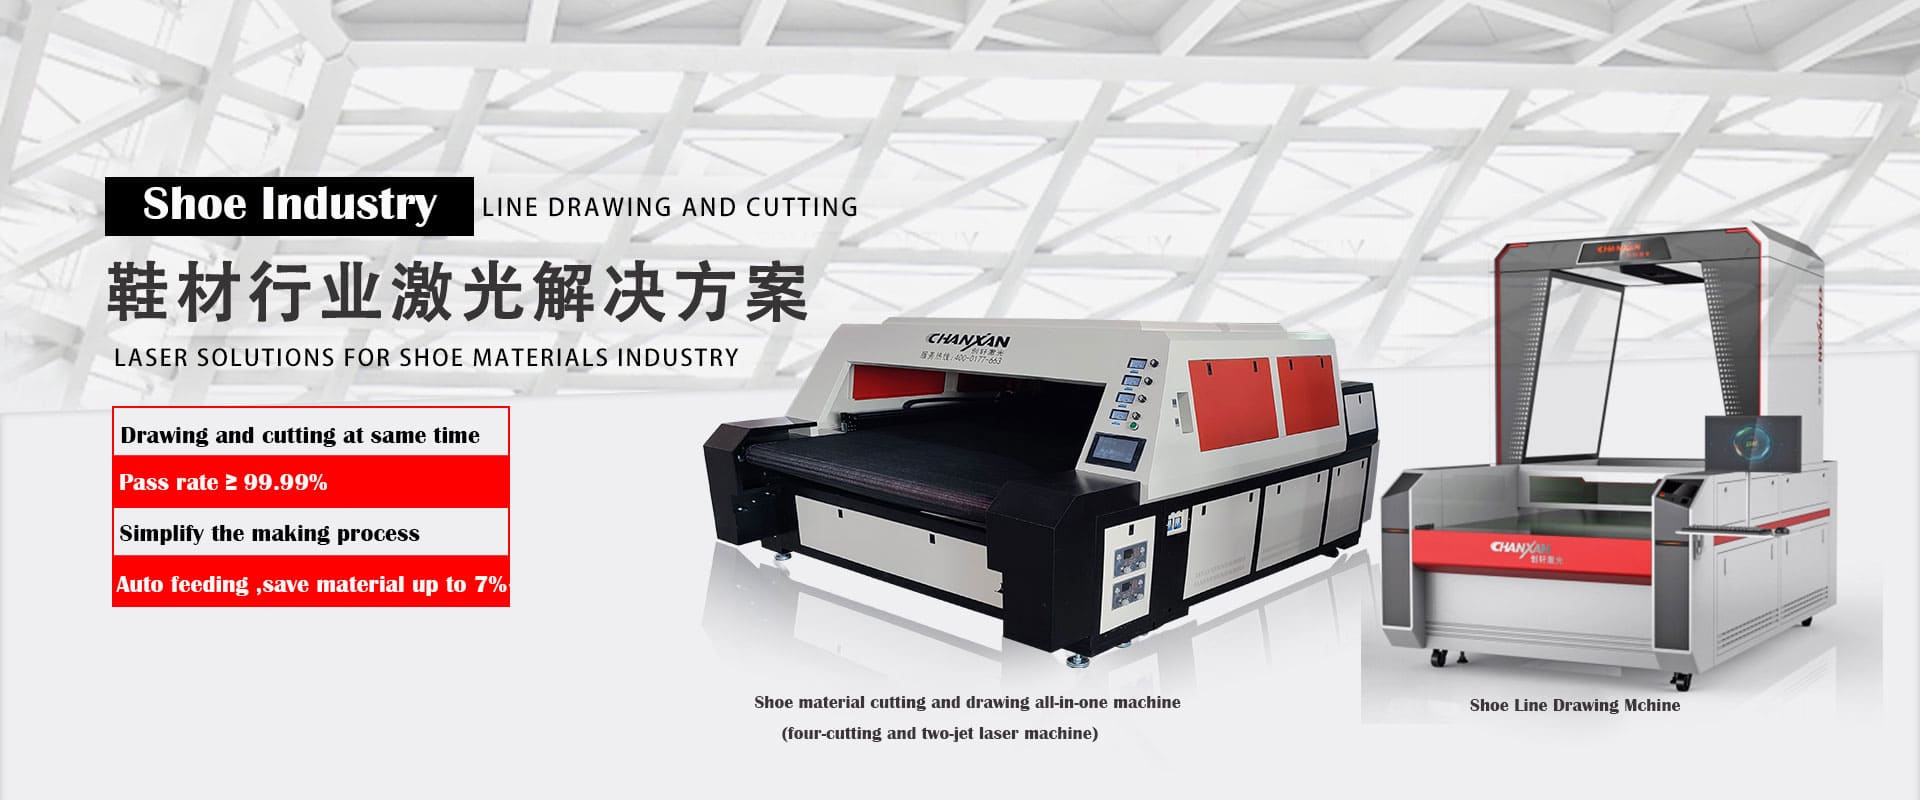 Cutting and drawing all-in-one machine